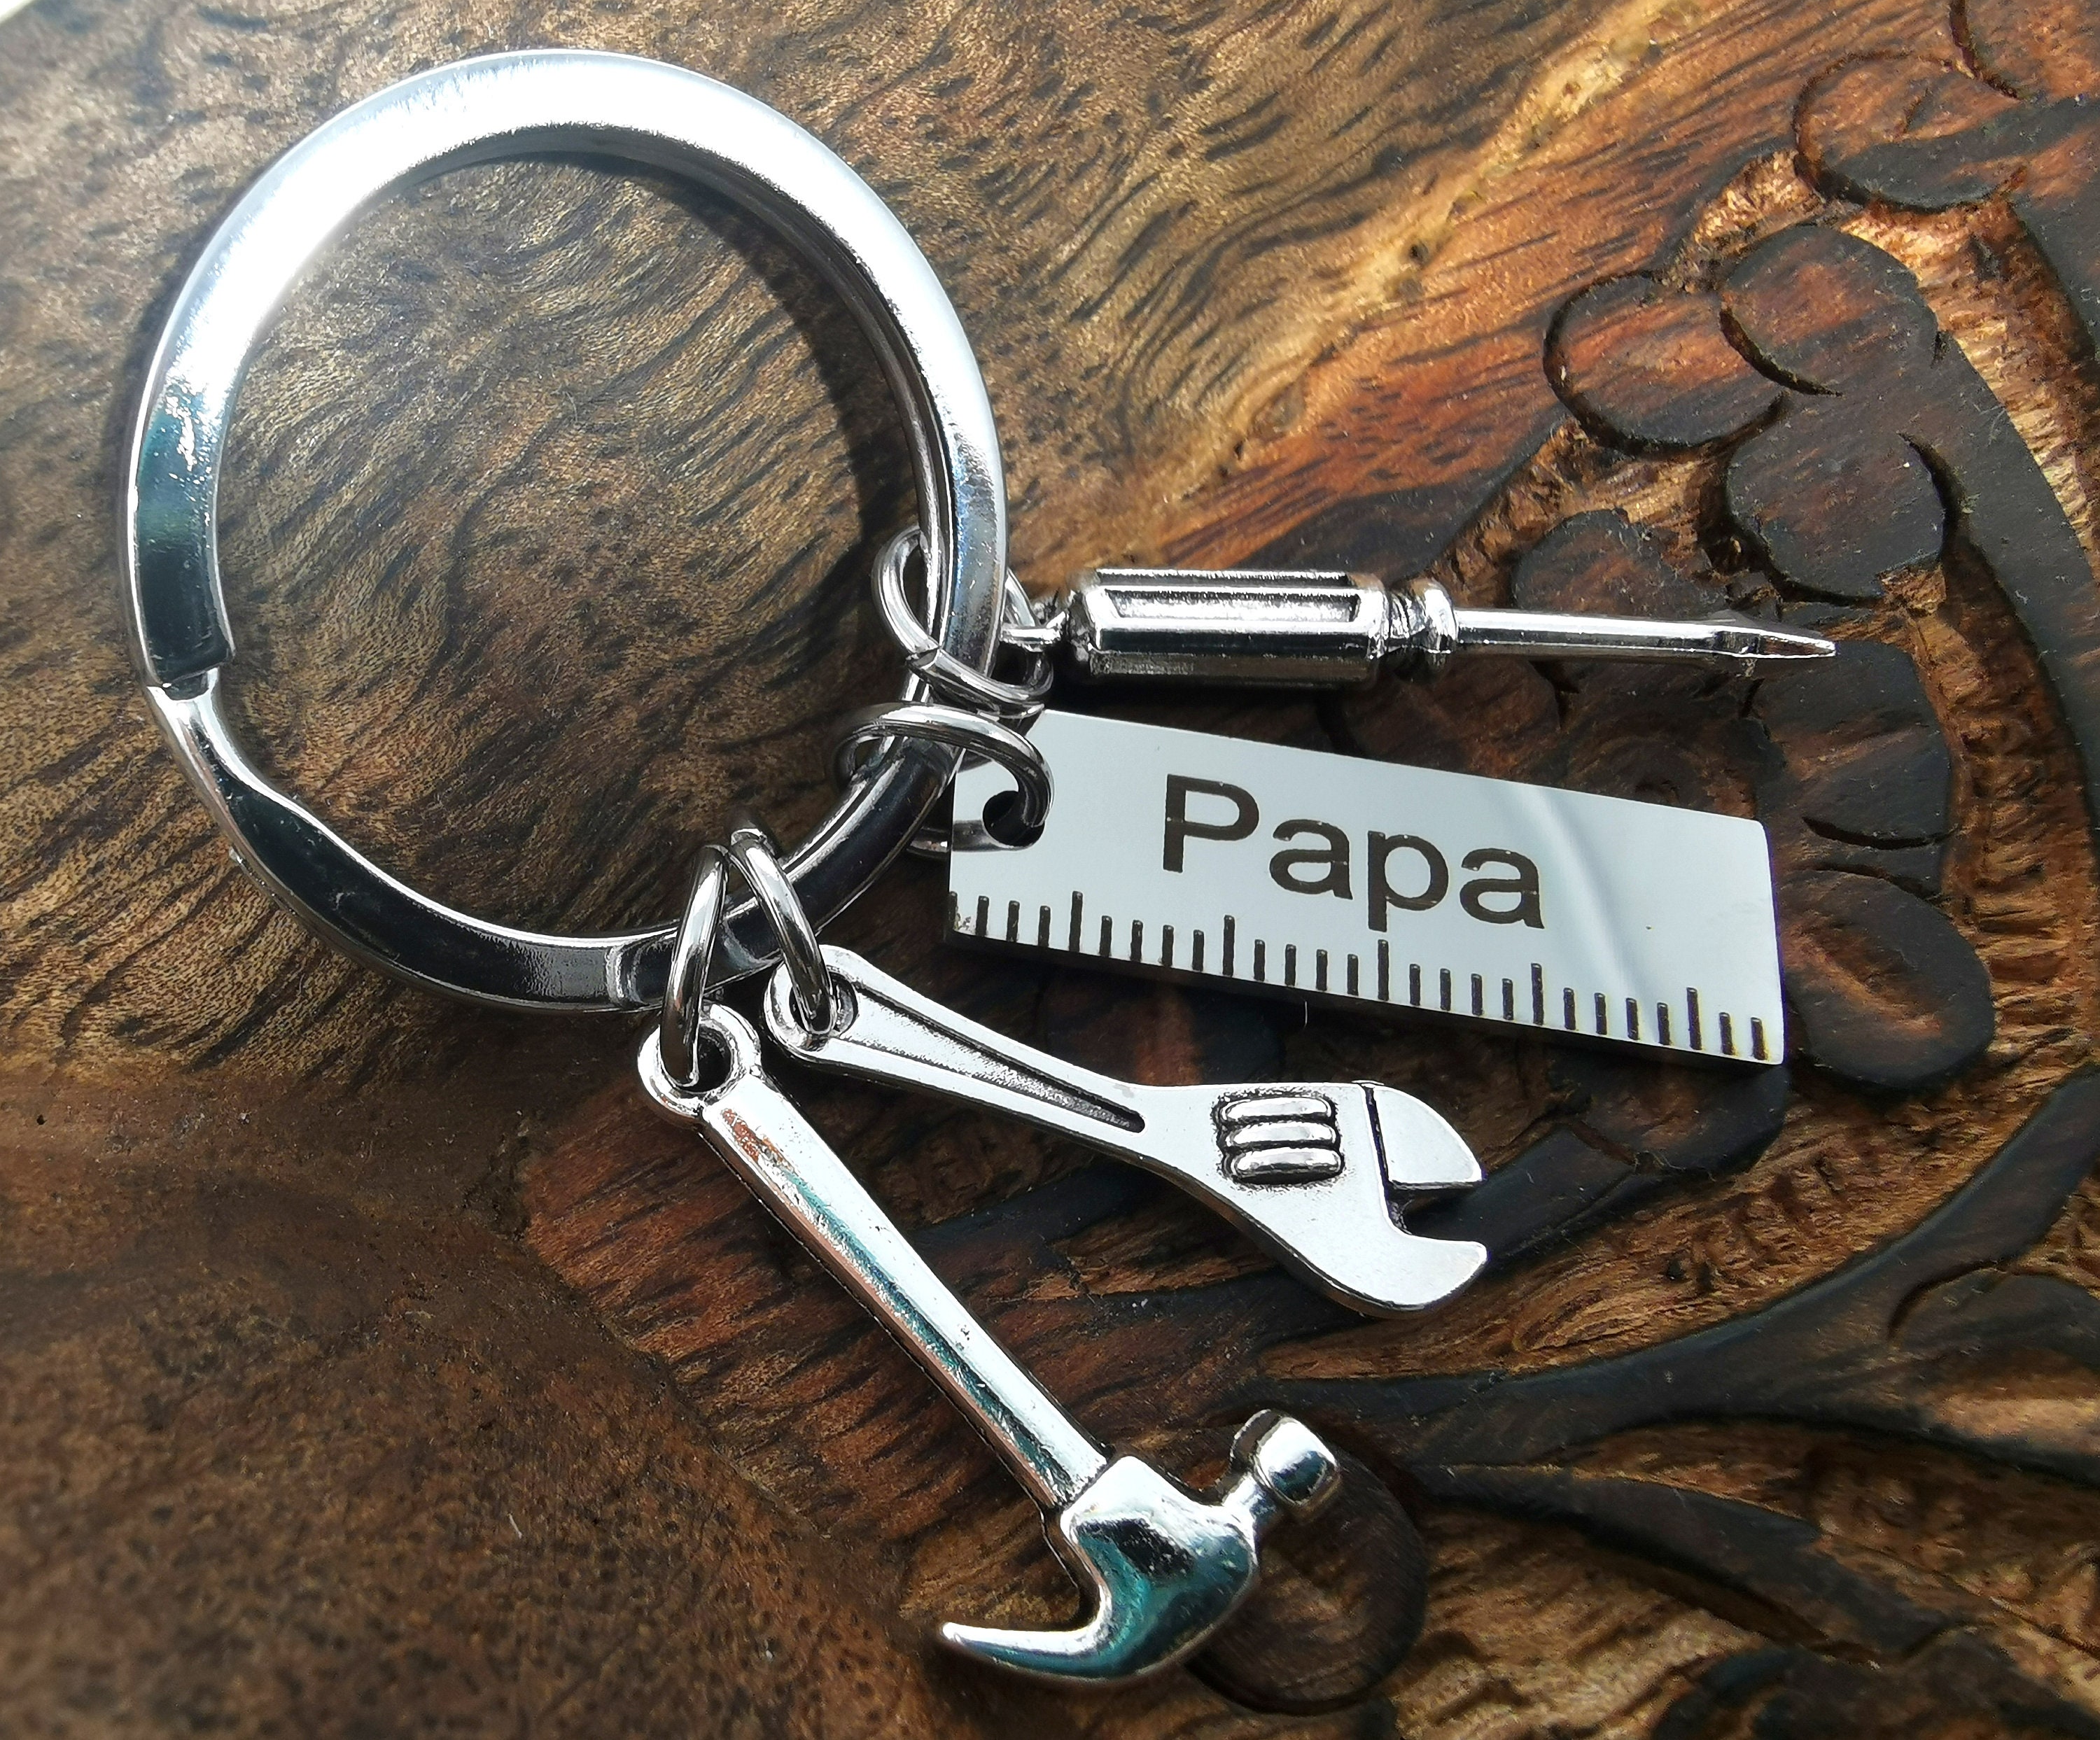 Juvale Dad Keychain from Daughter, I Love Papa Key Ring for Car & Home  Keys, Father's Day Gifts 3.5 x 1.6 In